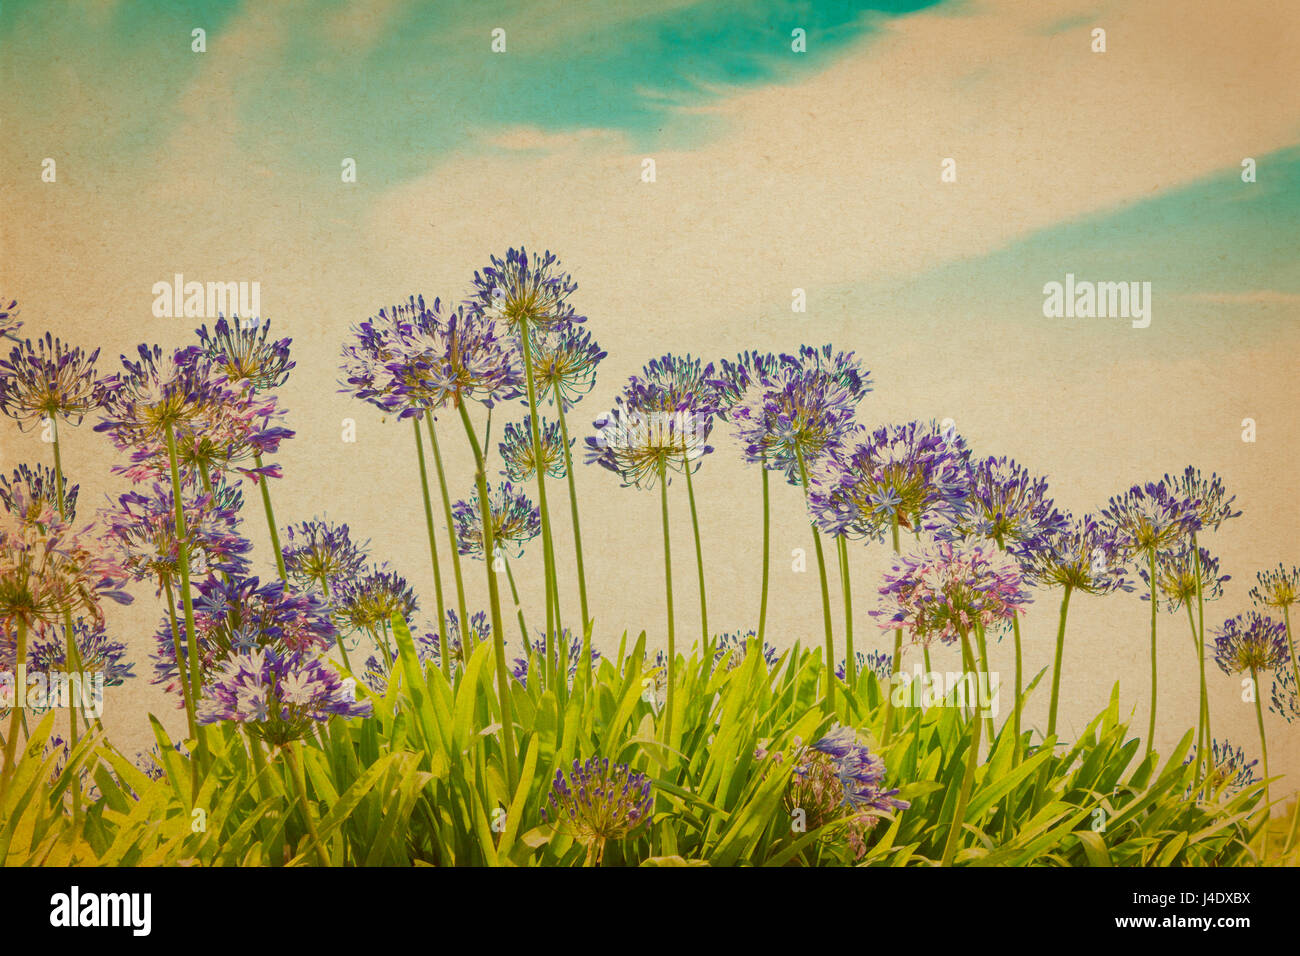 Purple agapanthus flowers in full bloom on a sunny day against blue sky, vintage or retro filter effect, copy, text space, nostalgic summer background Stock Photo